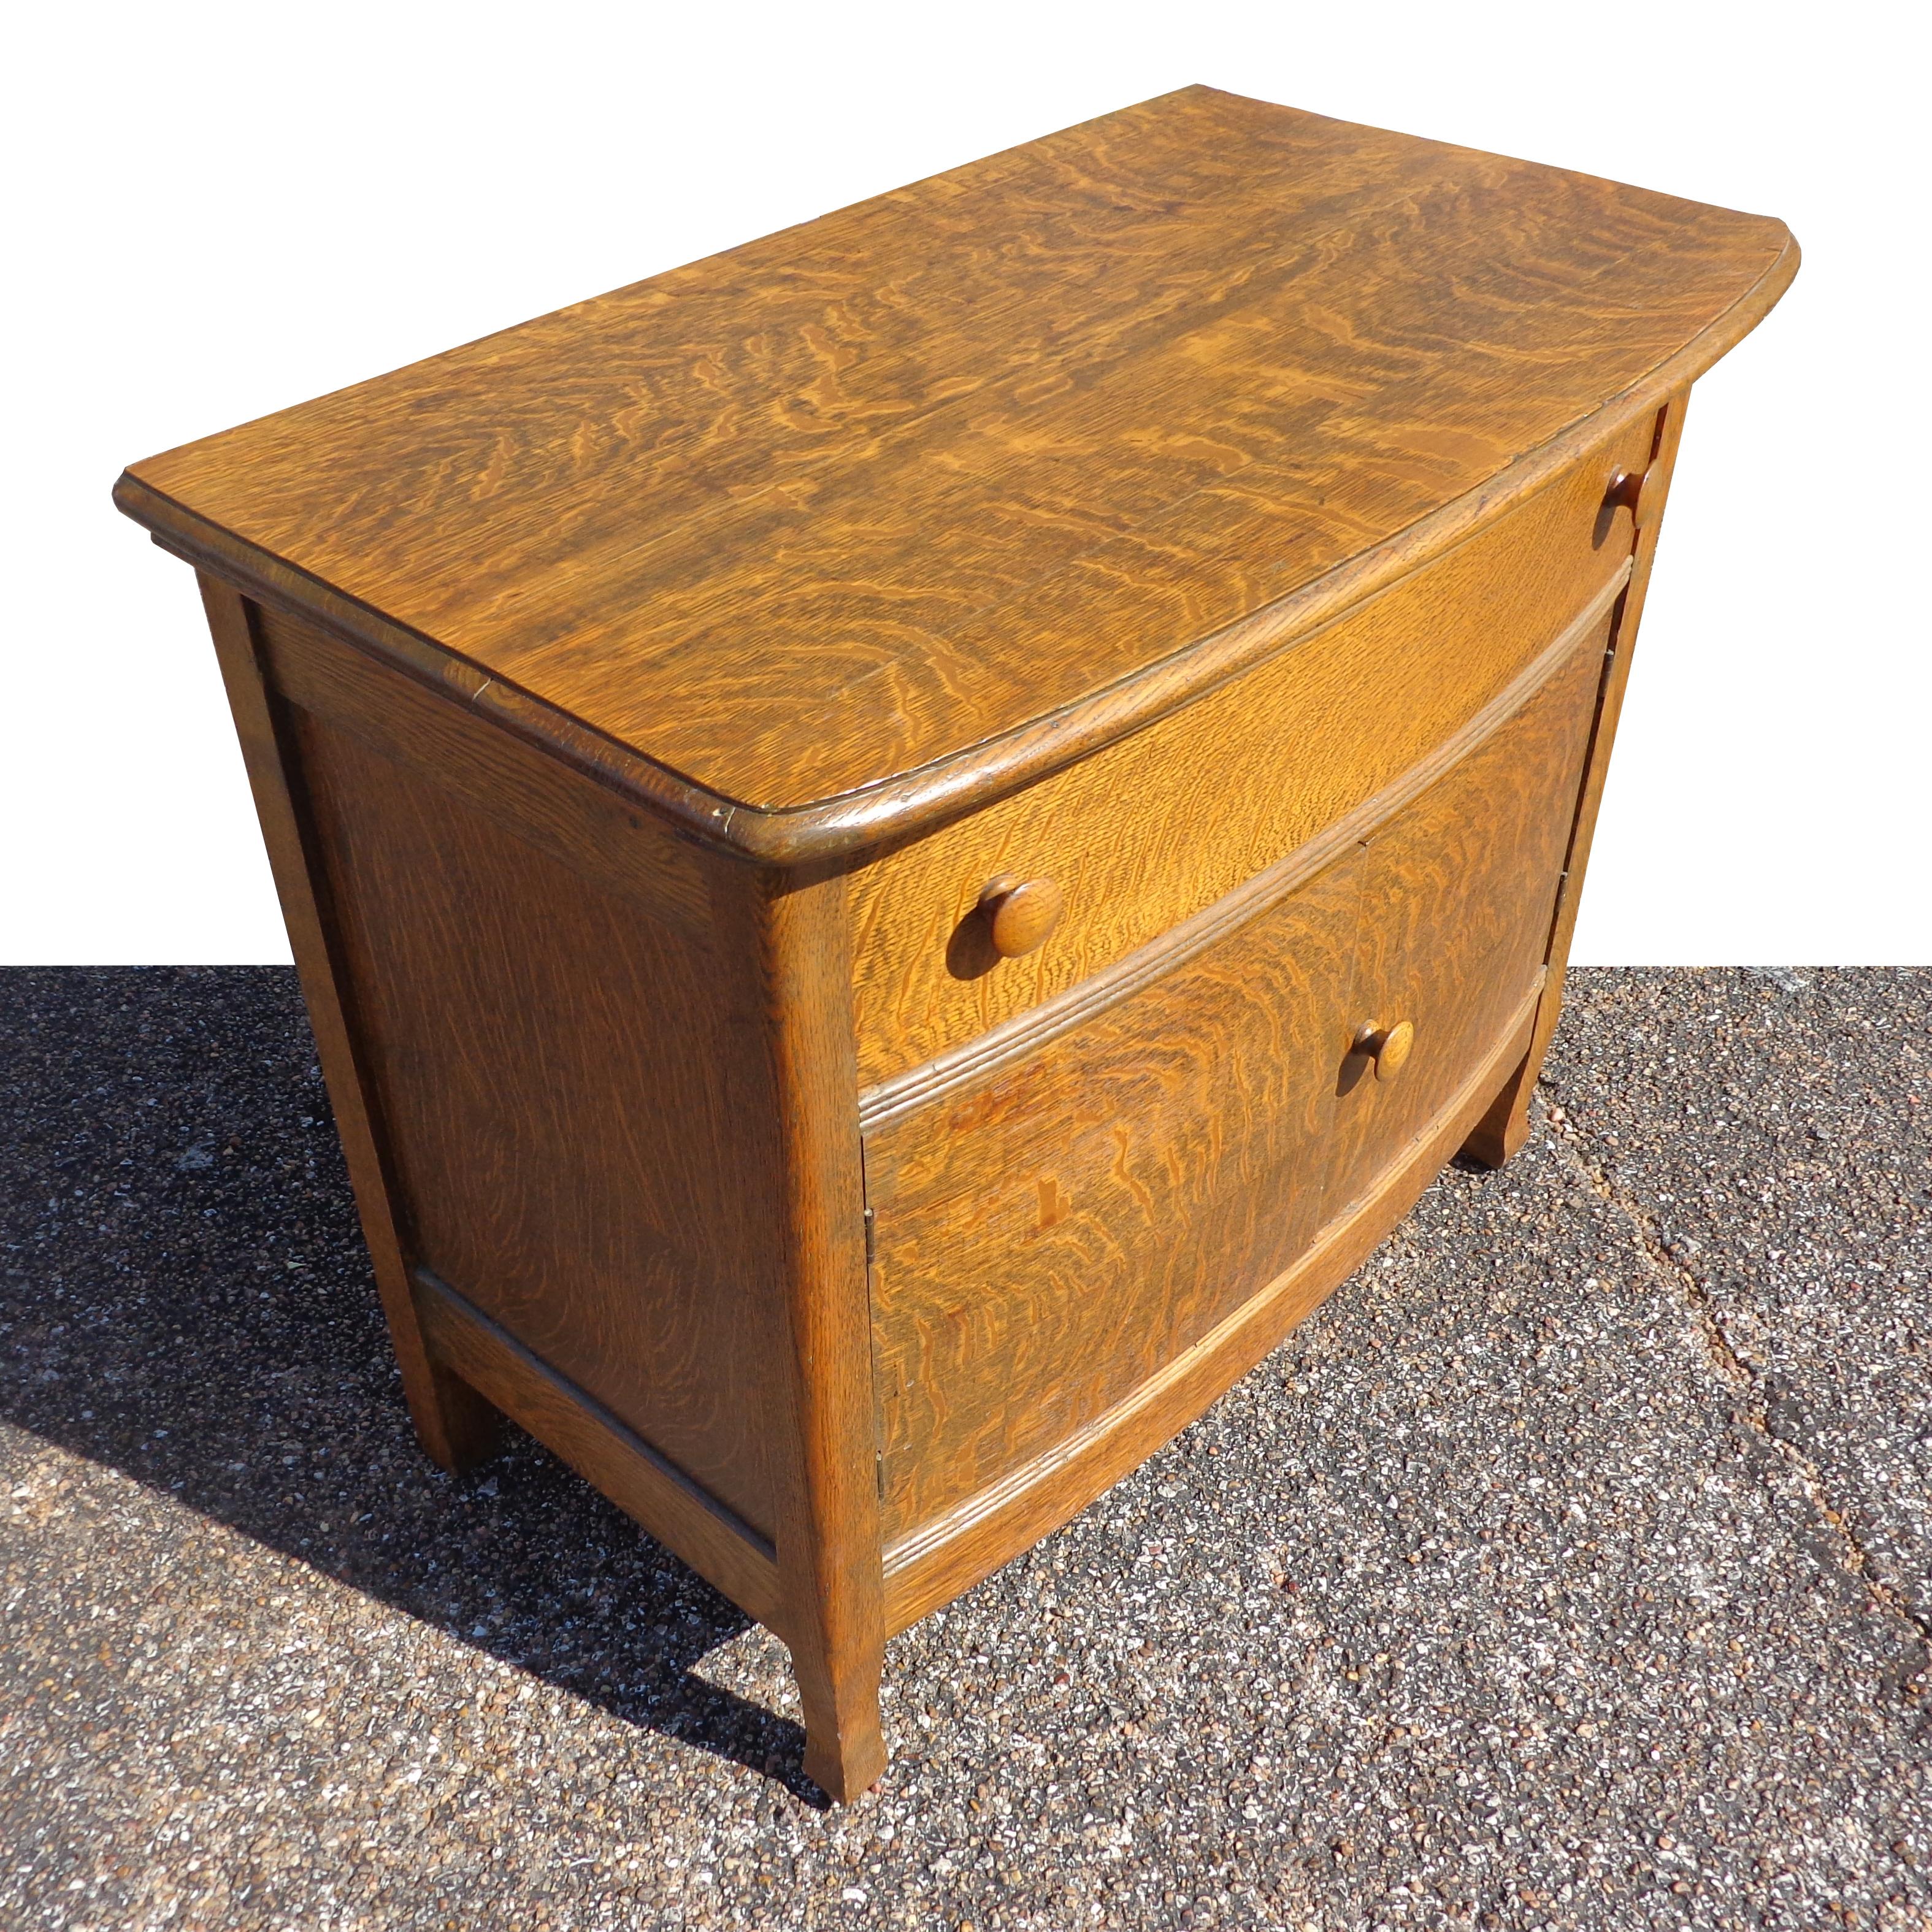 Antique Mission style tiger oak dresser

Antique tiger oak dresser early to mid 1900s. The dresser features stunning tiger oak wood grain and quality American craftsmanship. One drawer and a closed 2 door cabinet below. 

 Measures: 33